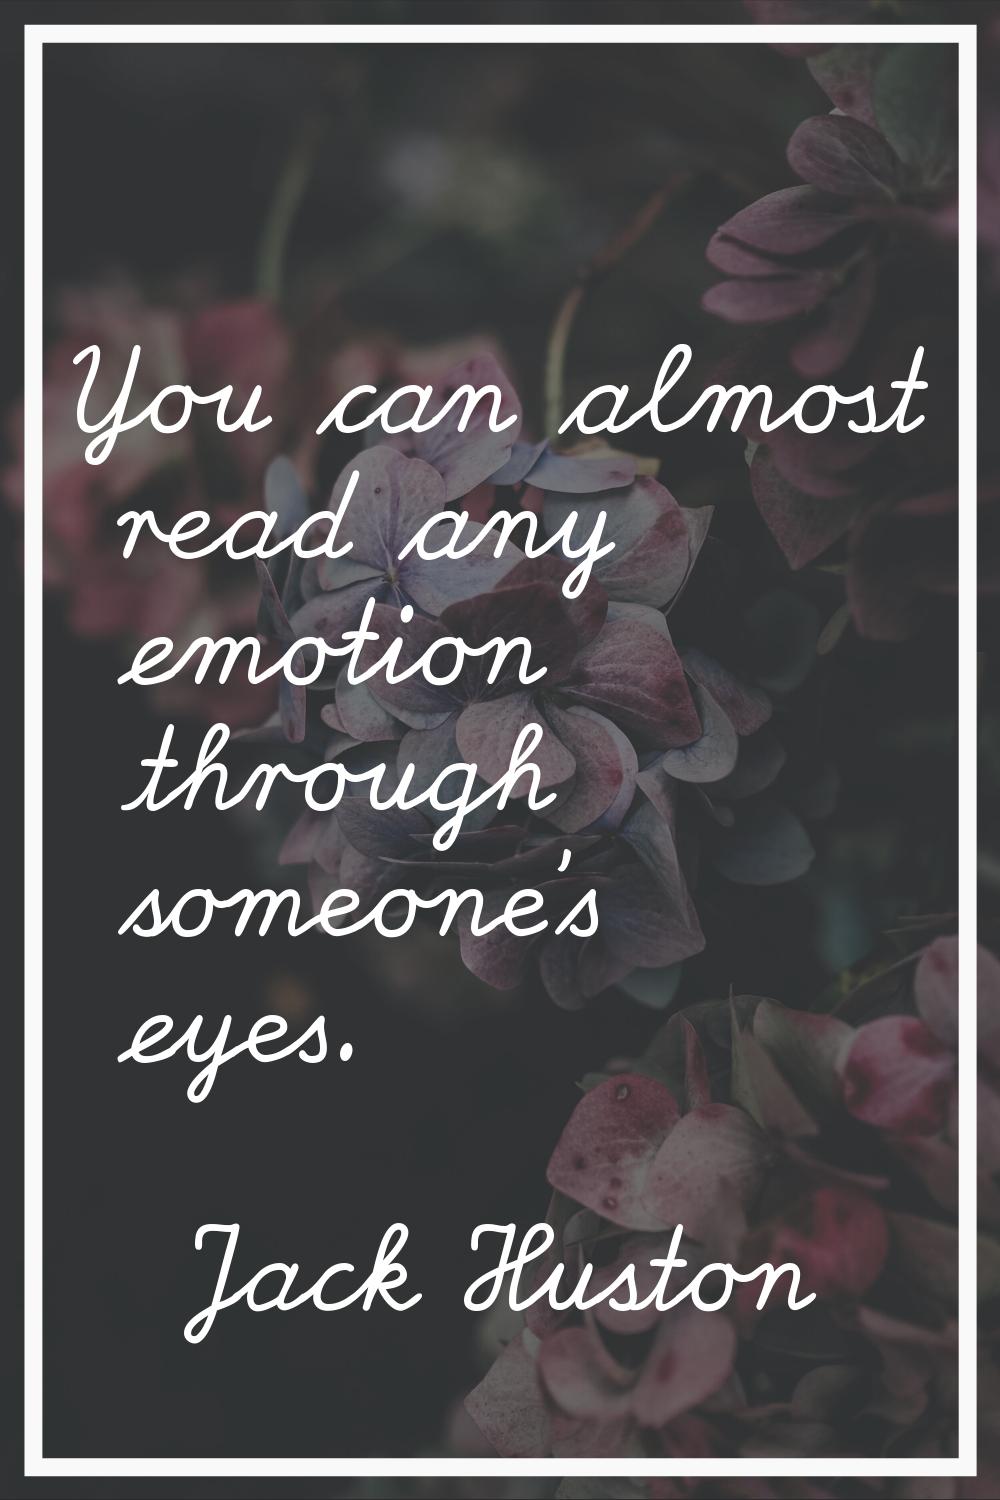 You can almost read any emotion through someone's eyes.